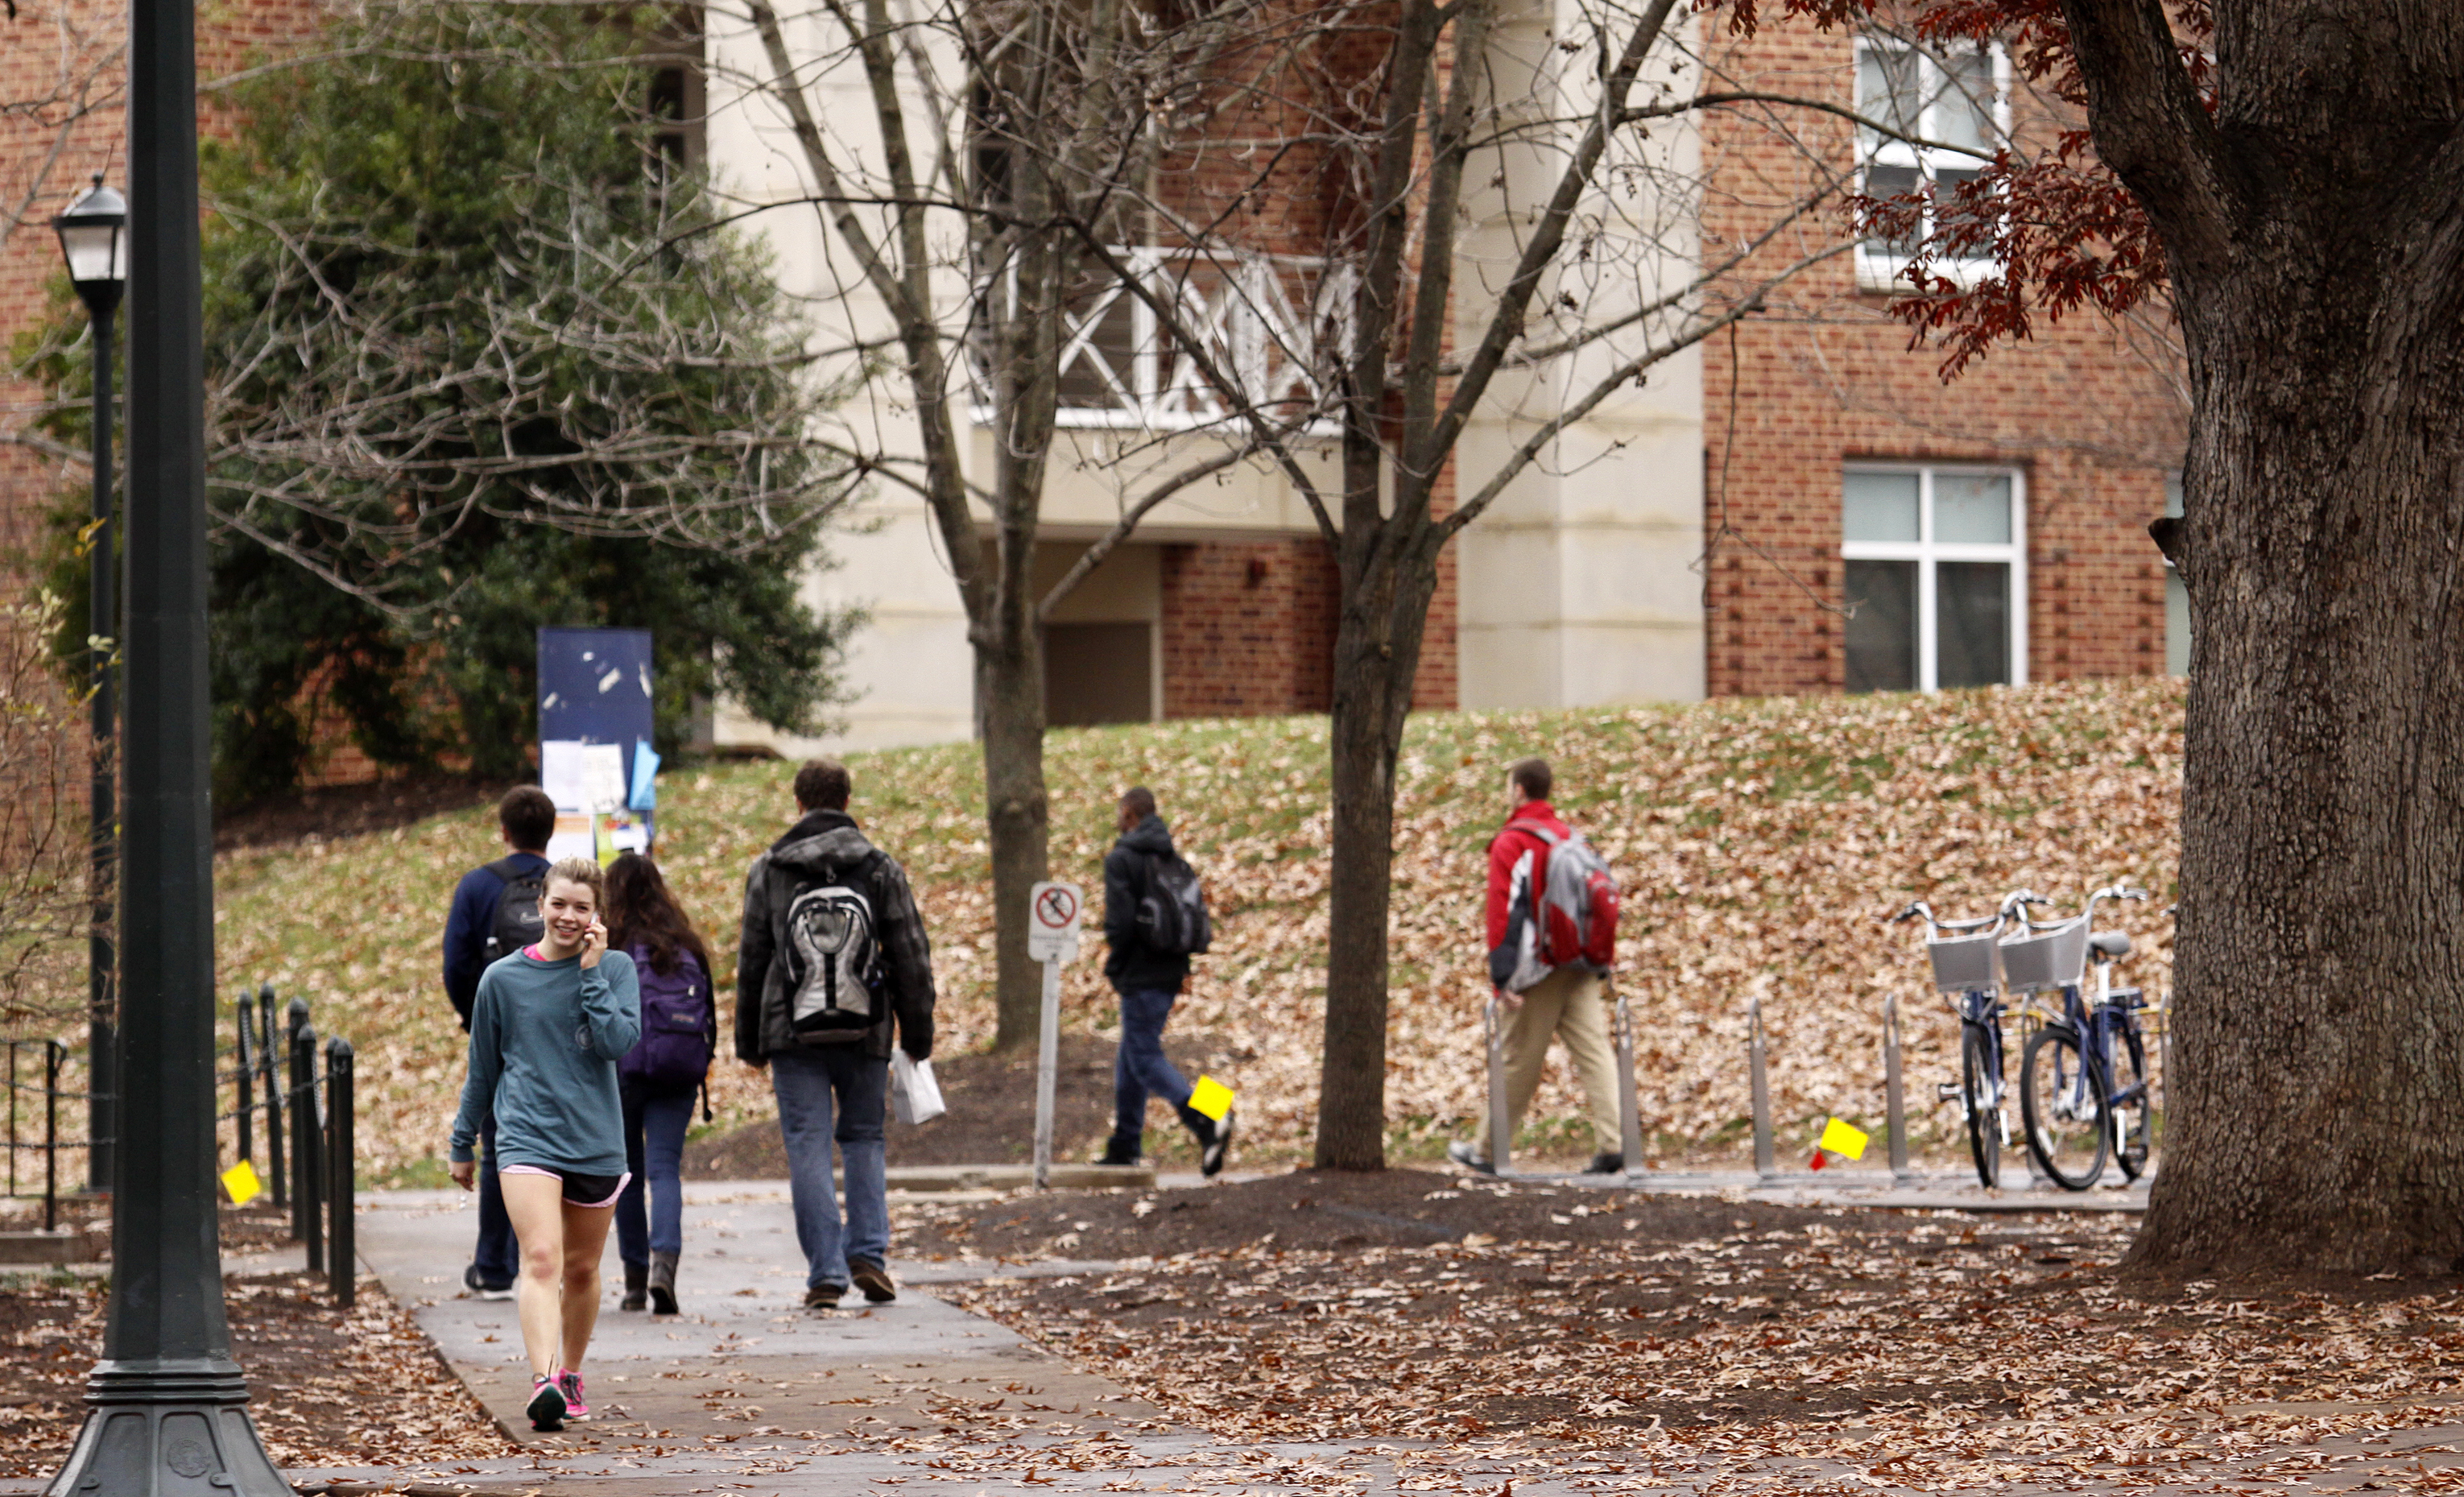 Students walk through the University of Virginia campus on December 6, 2014 in Charlottesville, Virginia. On Friday, Rolling Stone magazine issued an apology for discrepancies that were published in an article regarding the alleged gang rape of a University of Virginia student by members of the Phi Kappa Psi fraternity. (Getty)